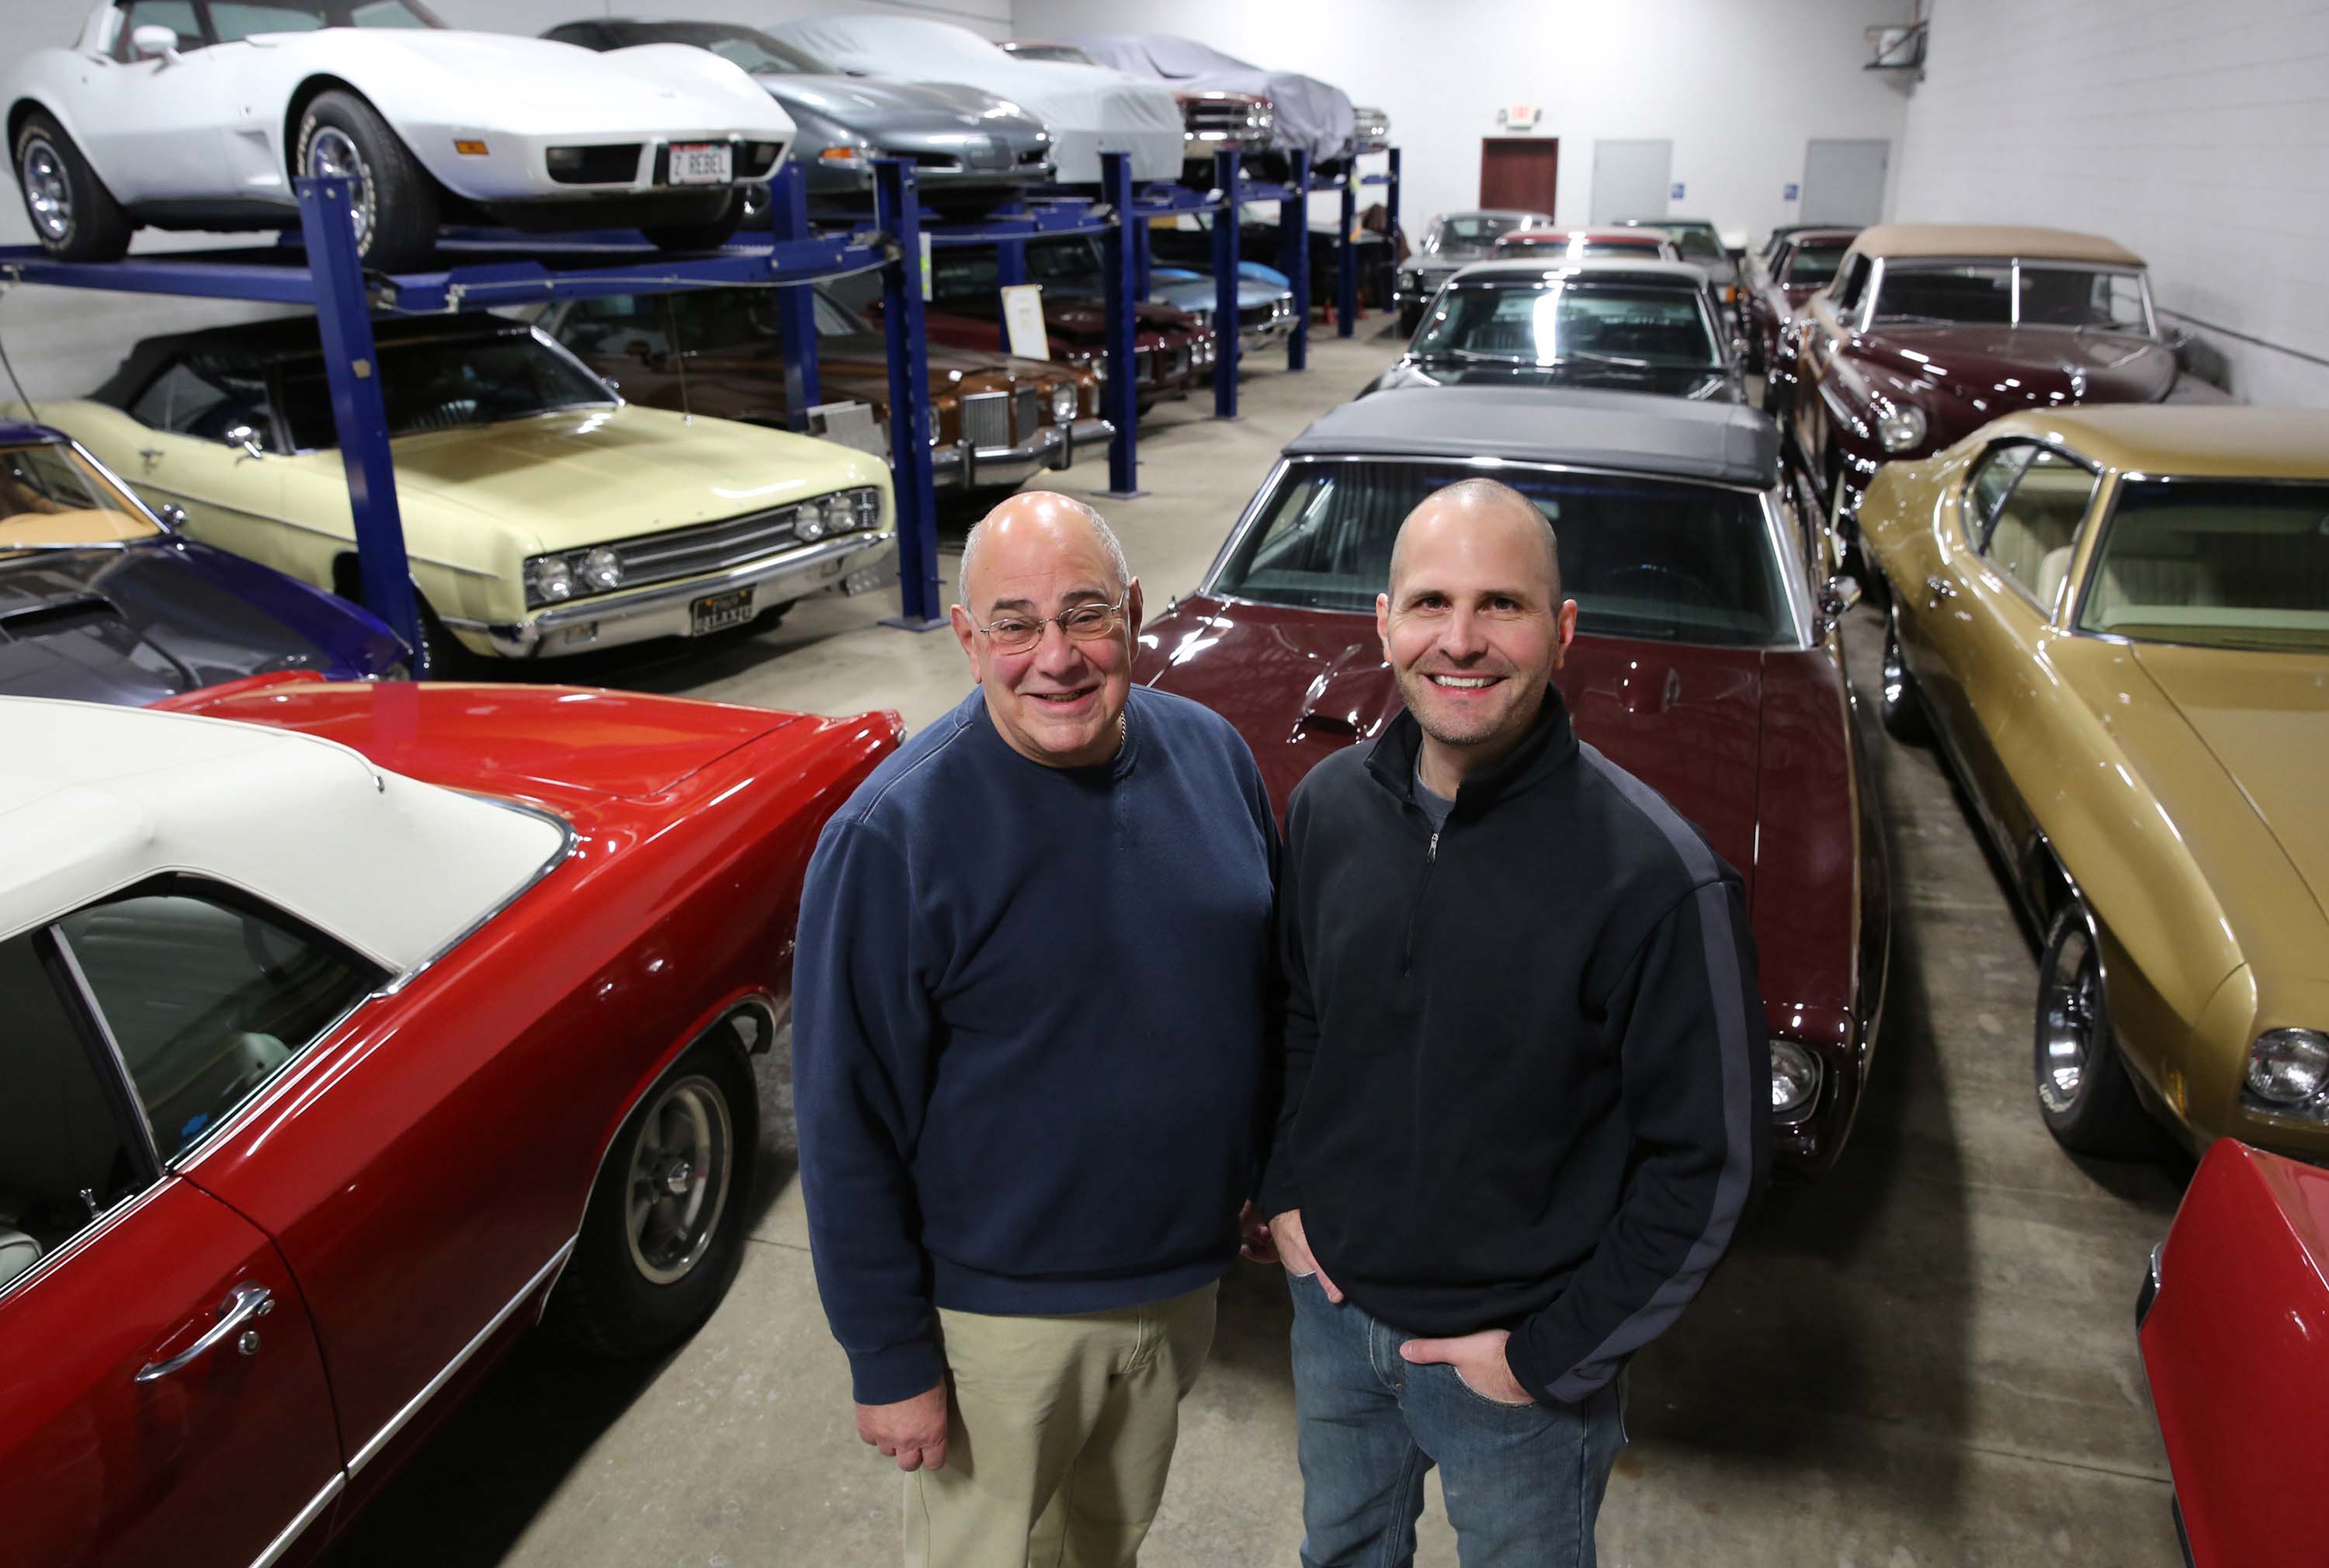 Father-son shop restores vintage cars for clients around the world pic